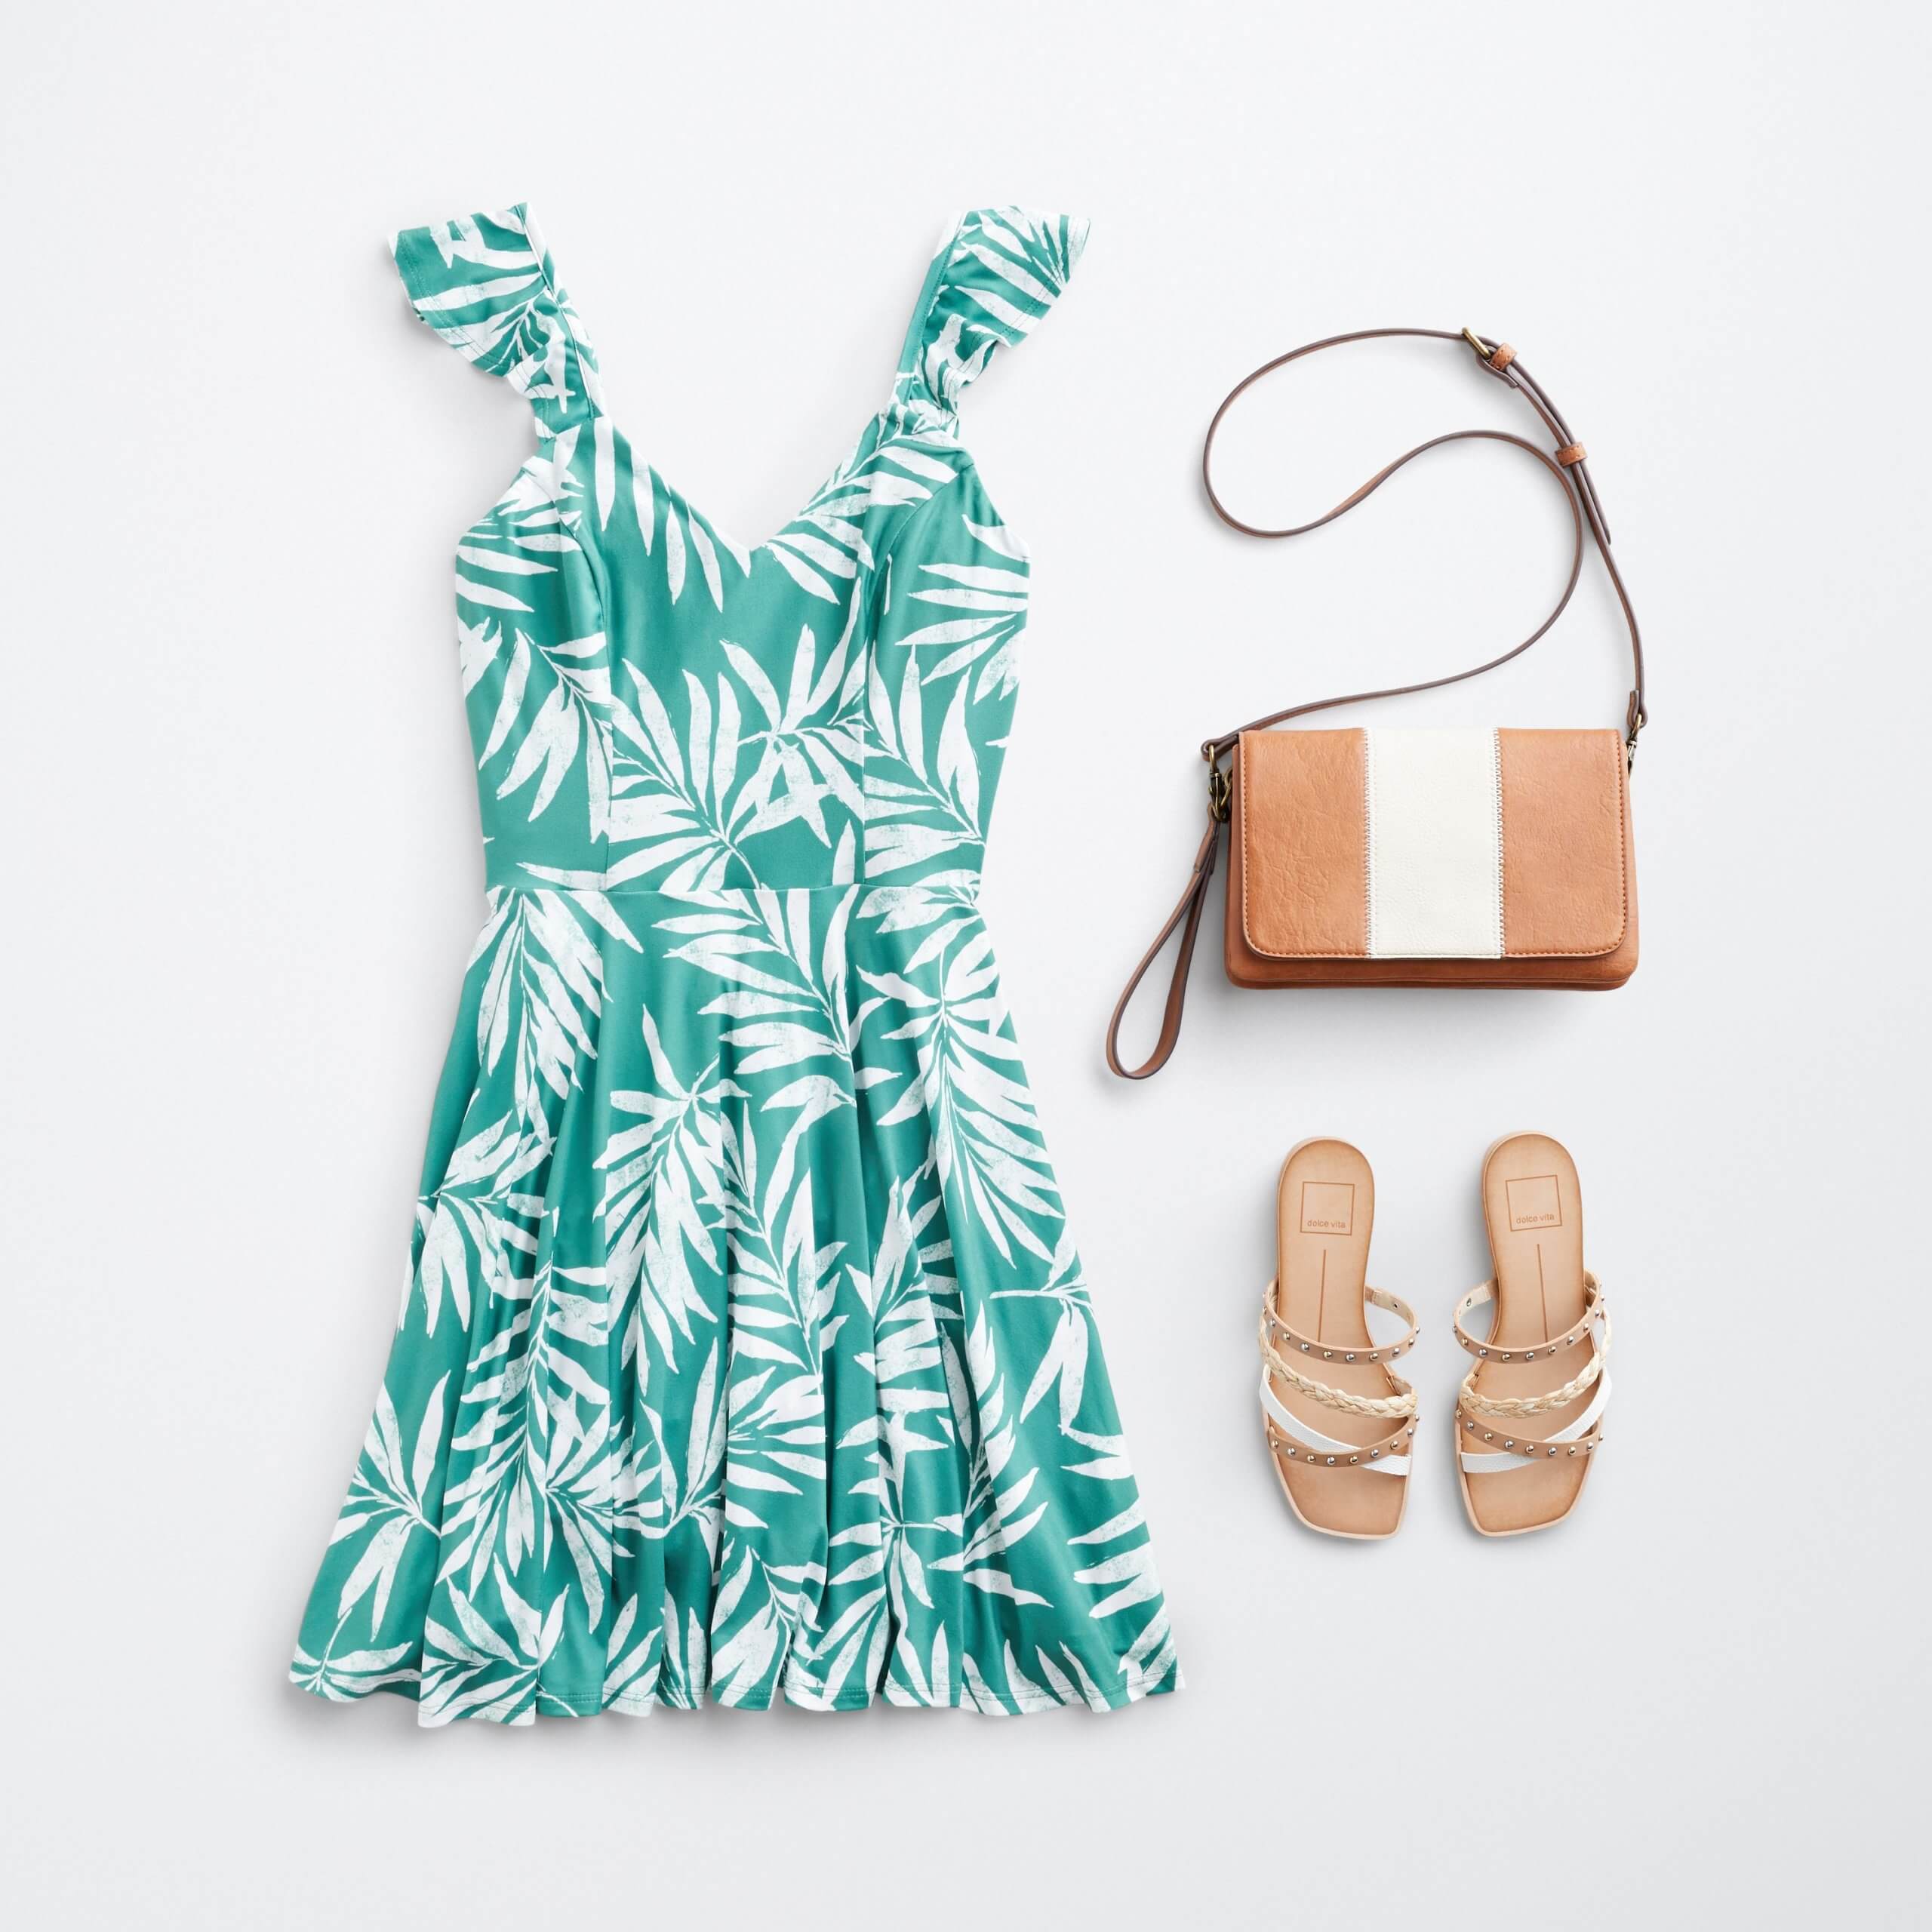 Stitch Fix women’s outfit laydown featuring green tropical print dress, brown and white bag and strappy sandals.